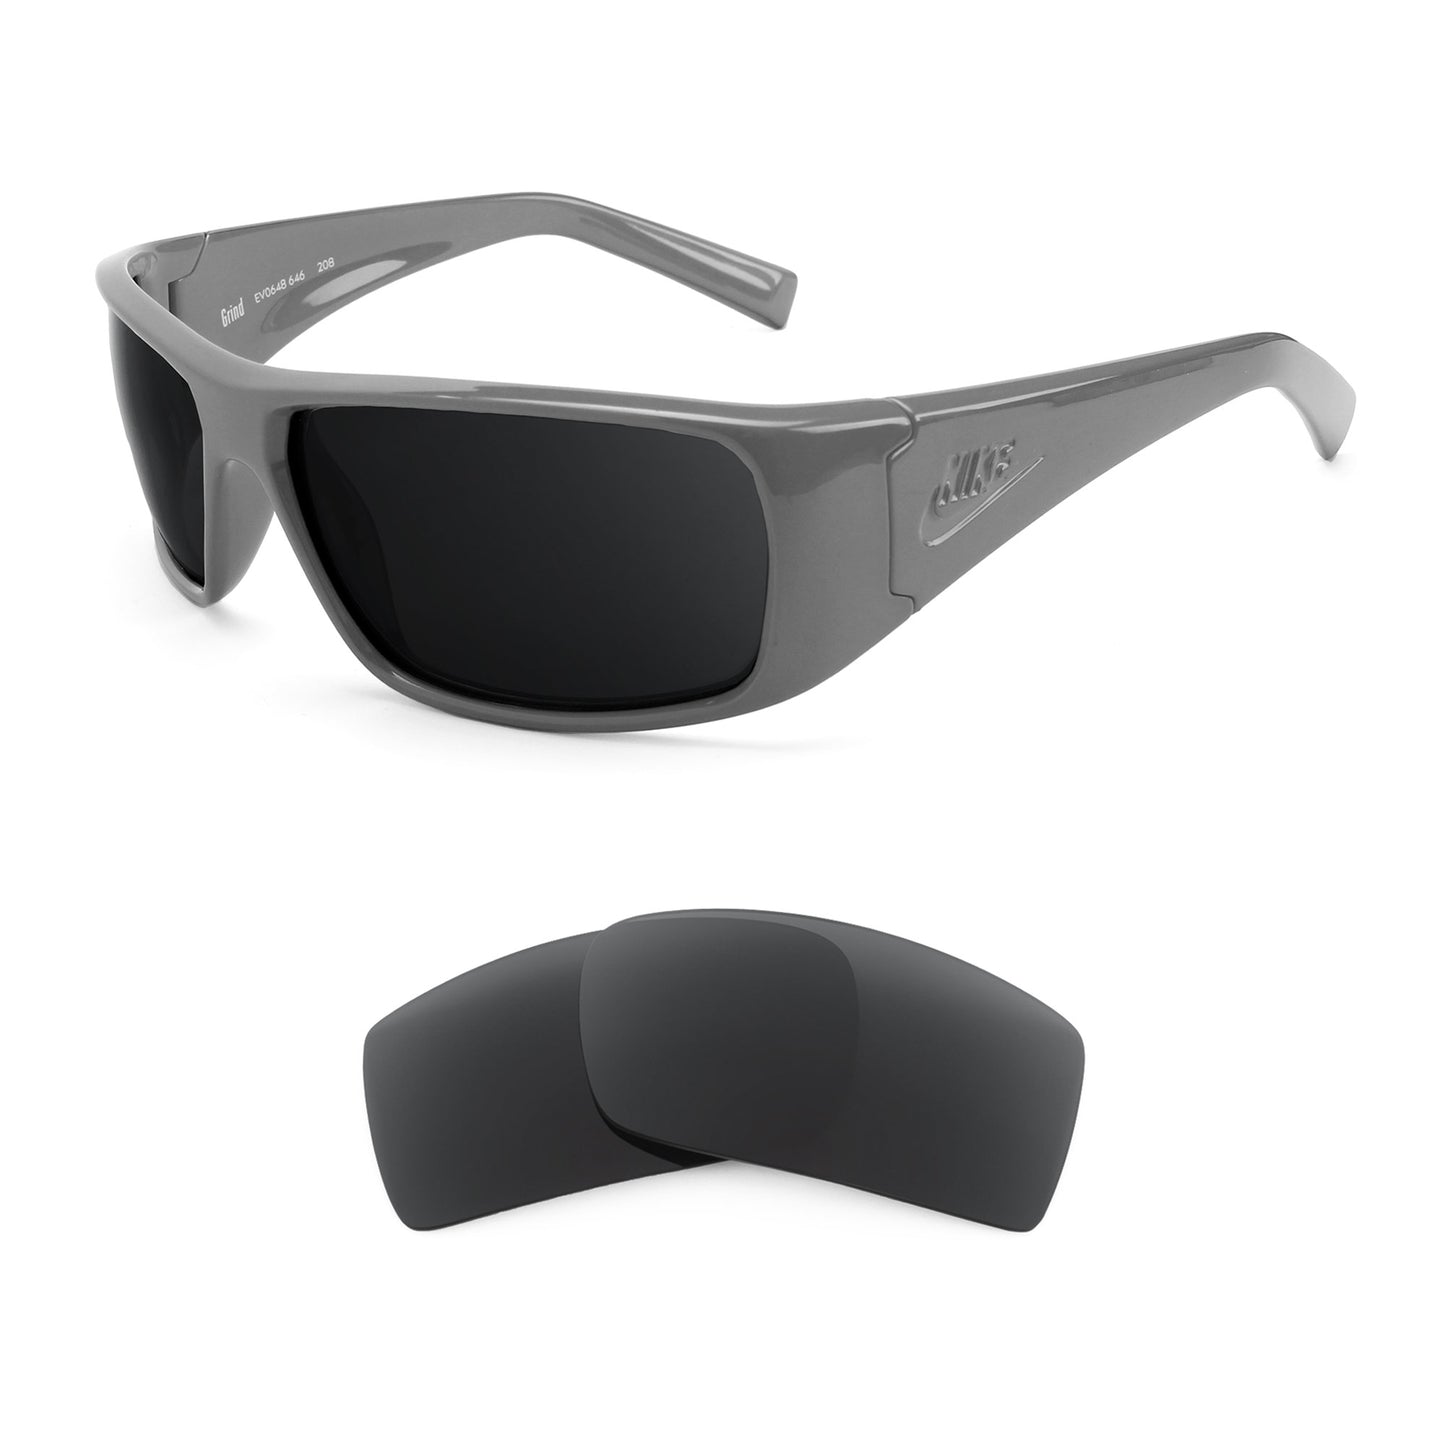 Nike Grind sunglasses with replacement lenses